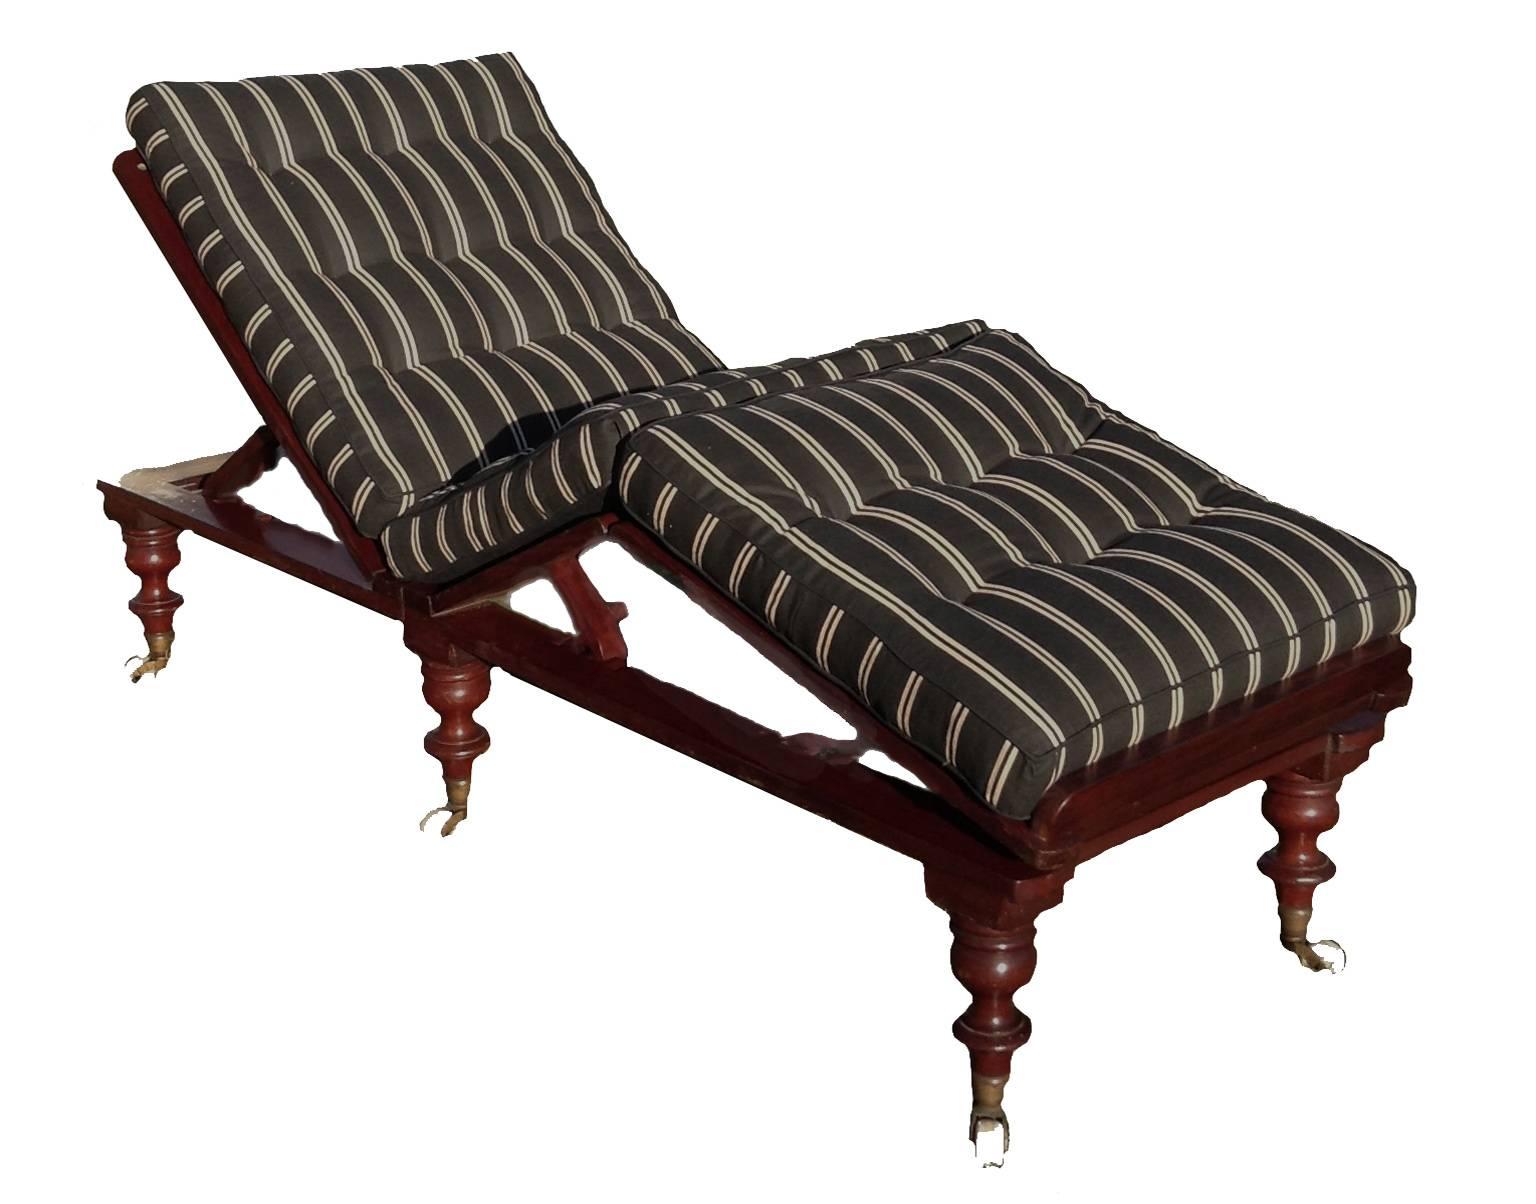 Mahogany caned, folding and fully adjustable daybed with removable legs and porcelain casters. Folds up for travel and goes completely flat for a daybed or couch. It has three sections each with a ratchet support for different back and knee